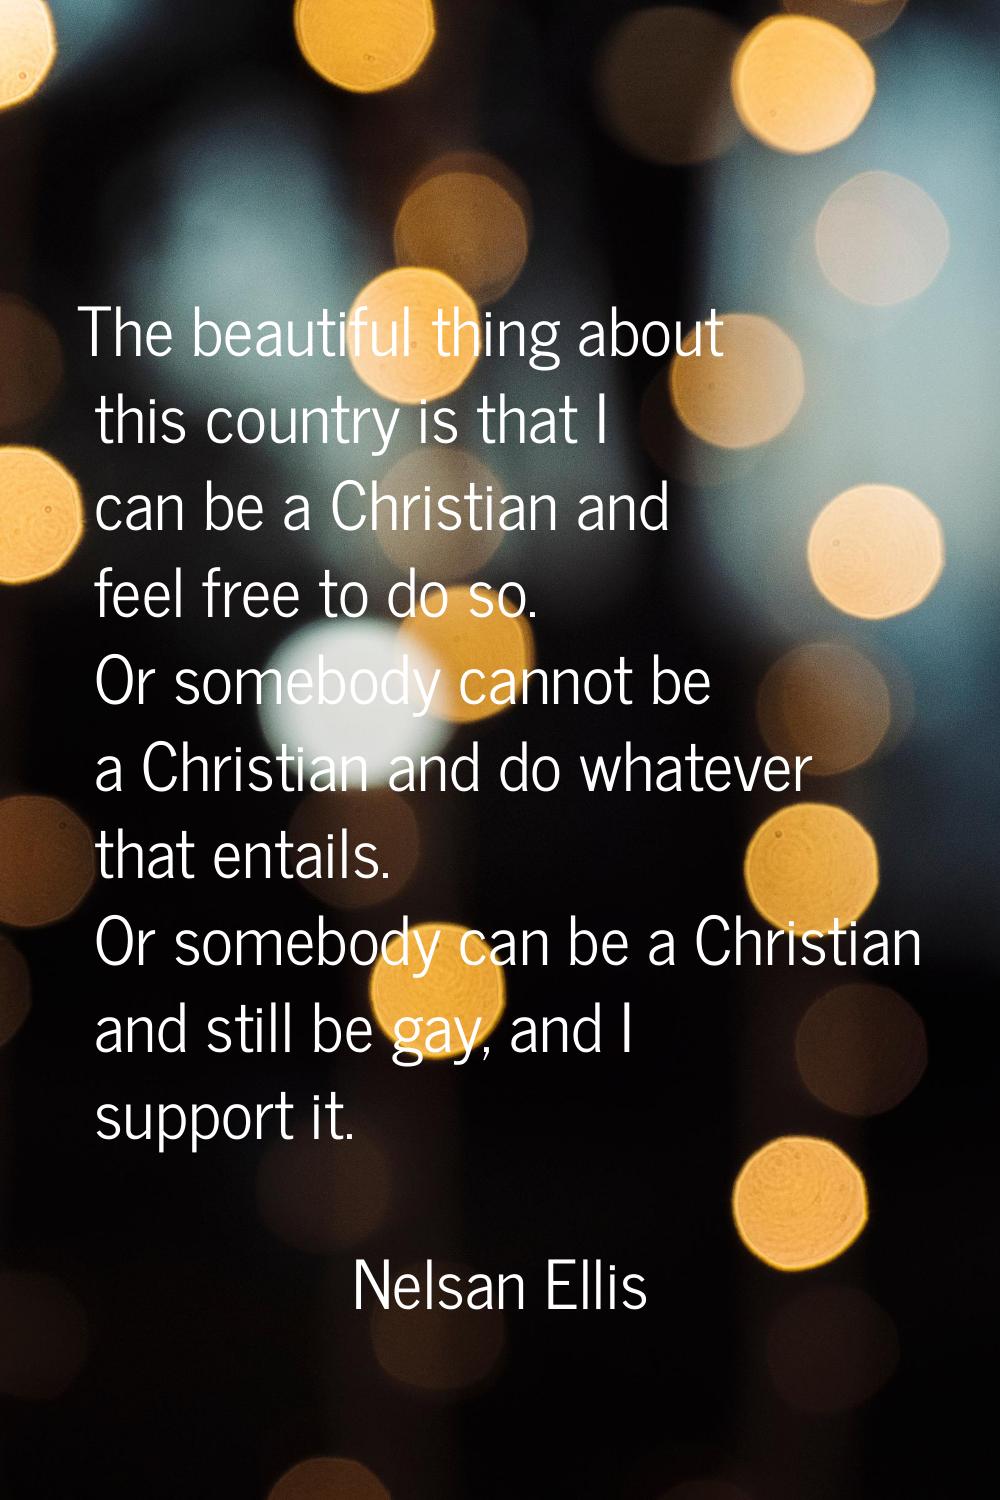 The beautiful thing about this country is that I can be a Christian and feel free to do so. Or some